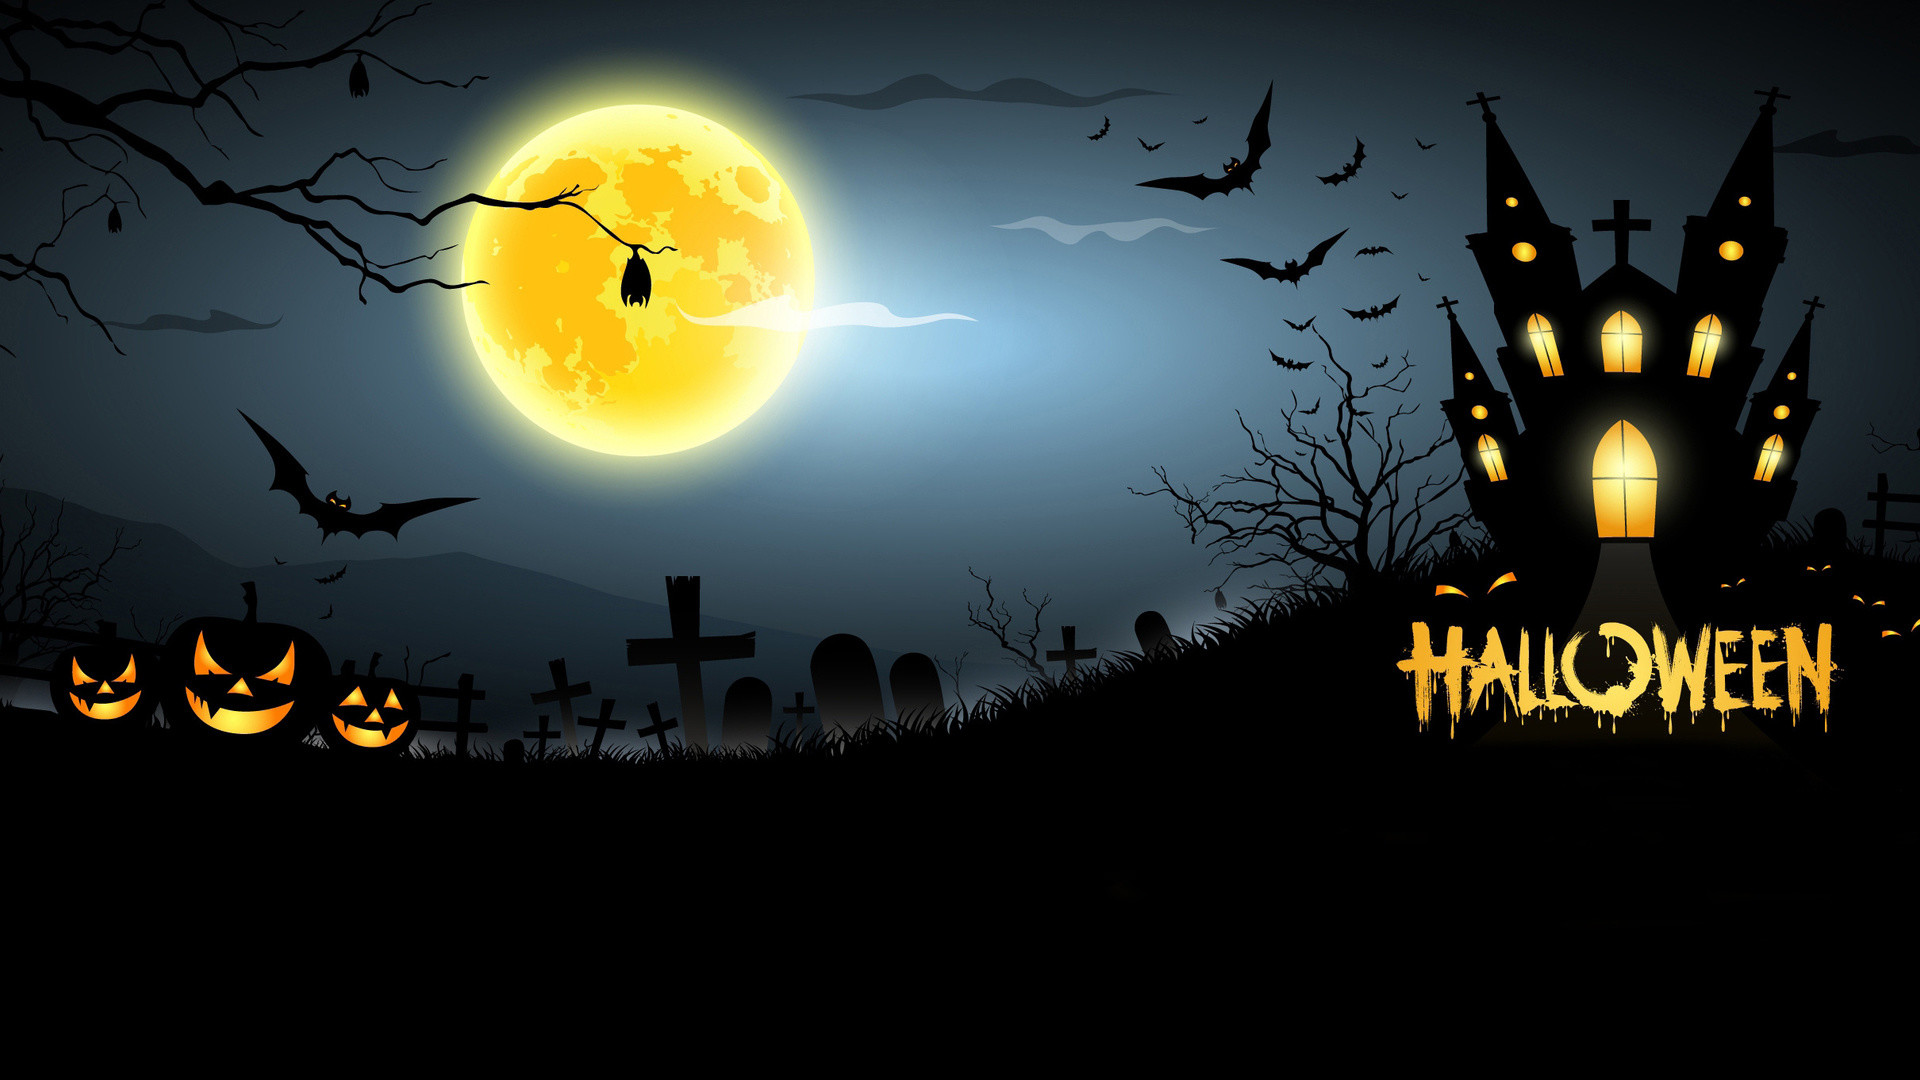 Scary Halloween Background Images (62+ images)